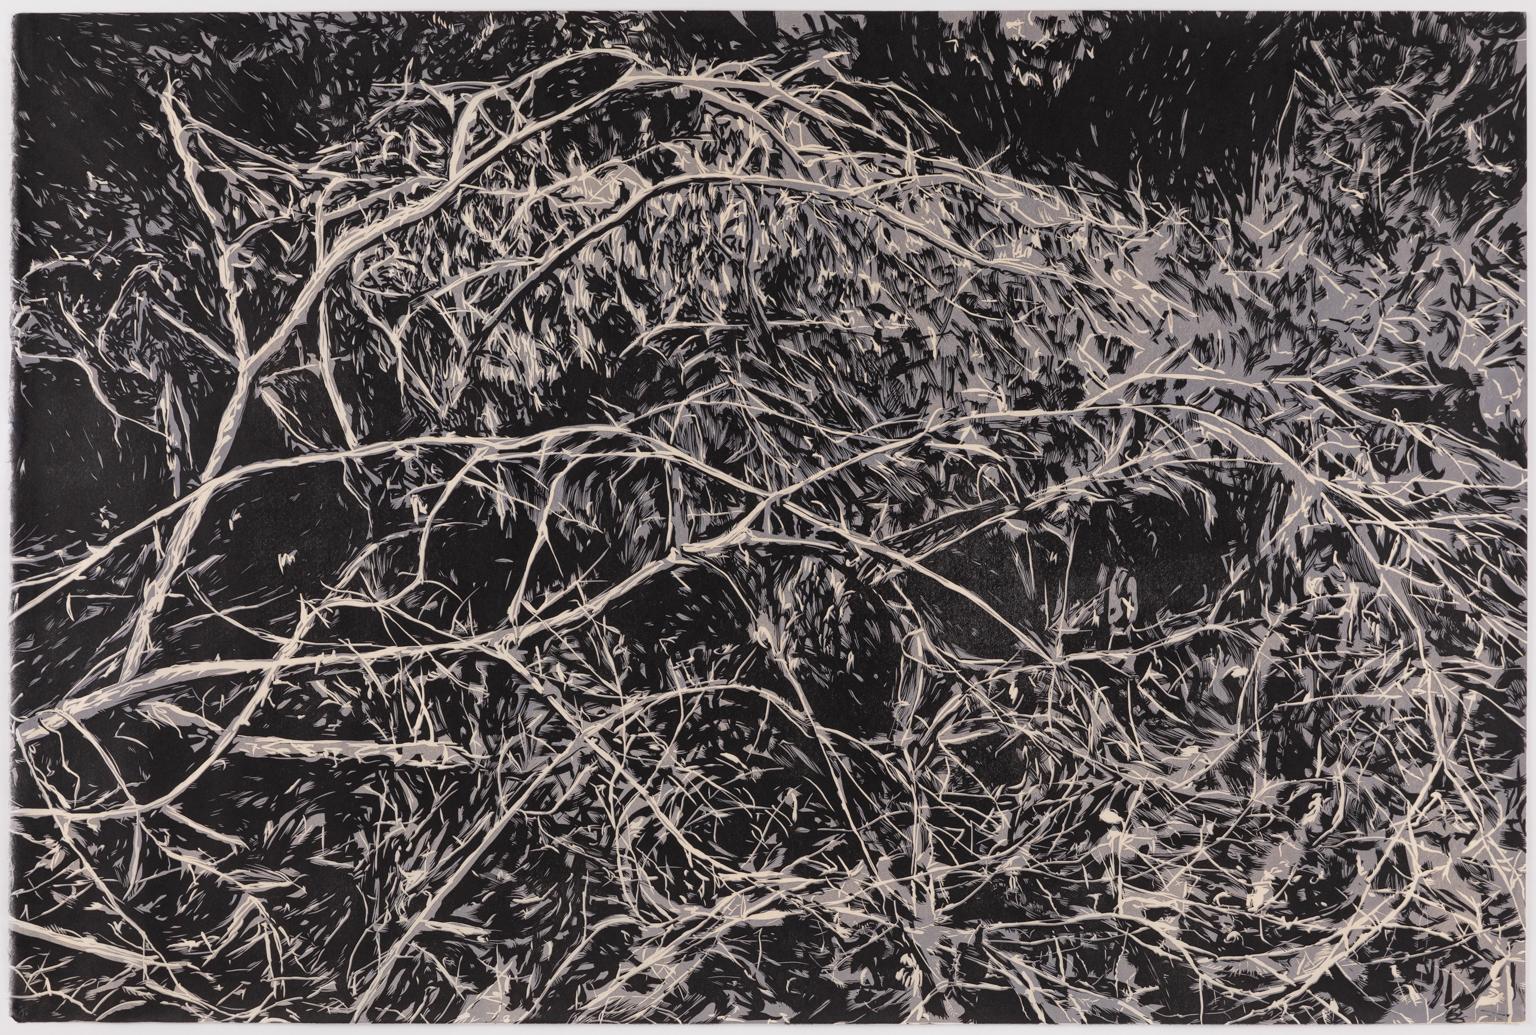 Whirl - Large Print of Tangled Branches with Foliage in Black and Gray